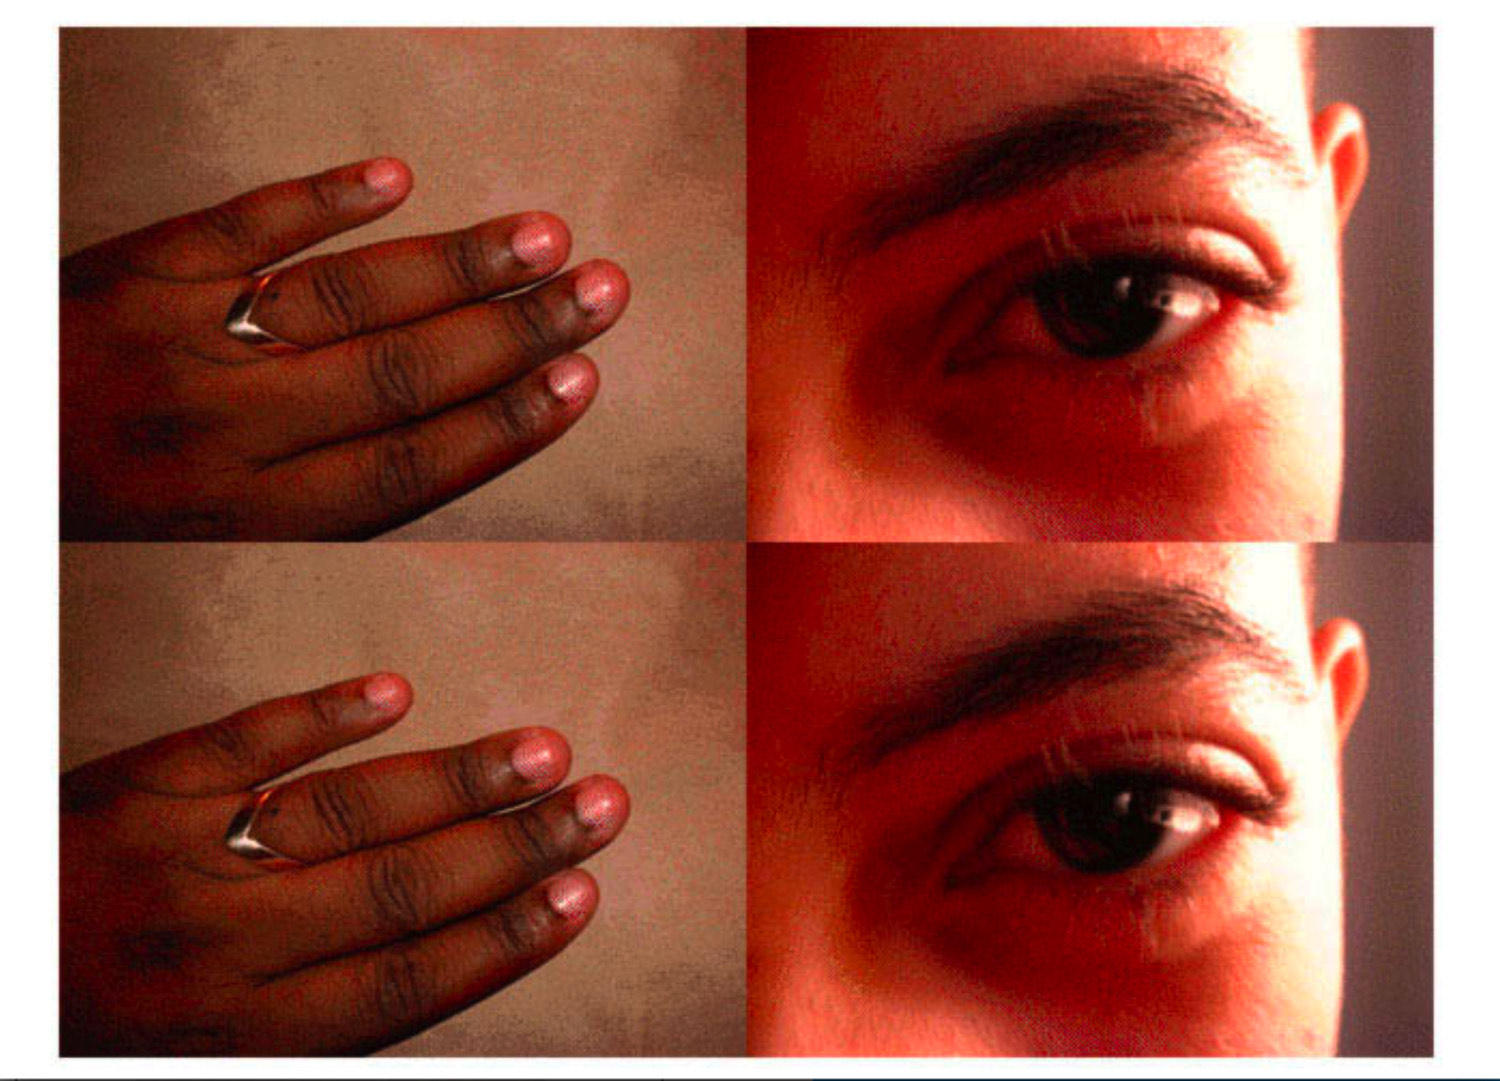 A grid of four close-up images, two of a hand and two of an eye, all zooming in on dark-skinned bodies